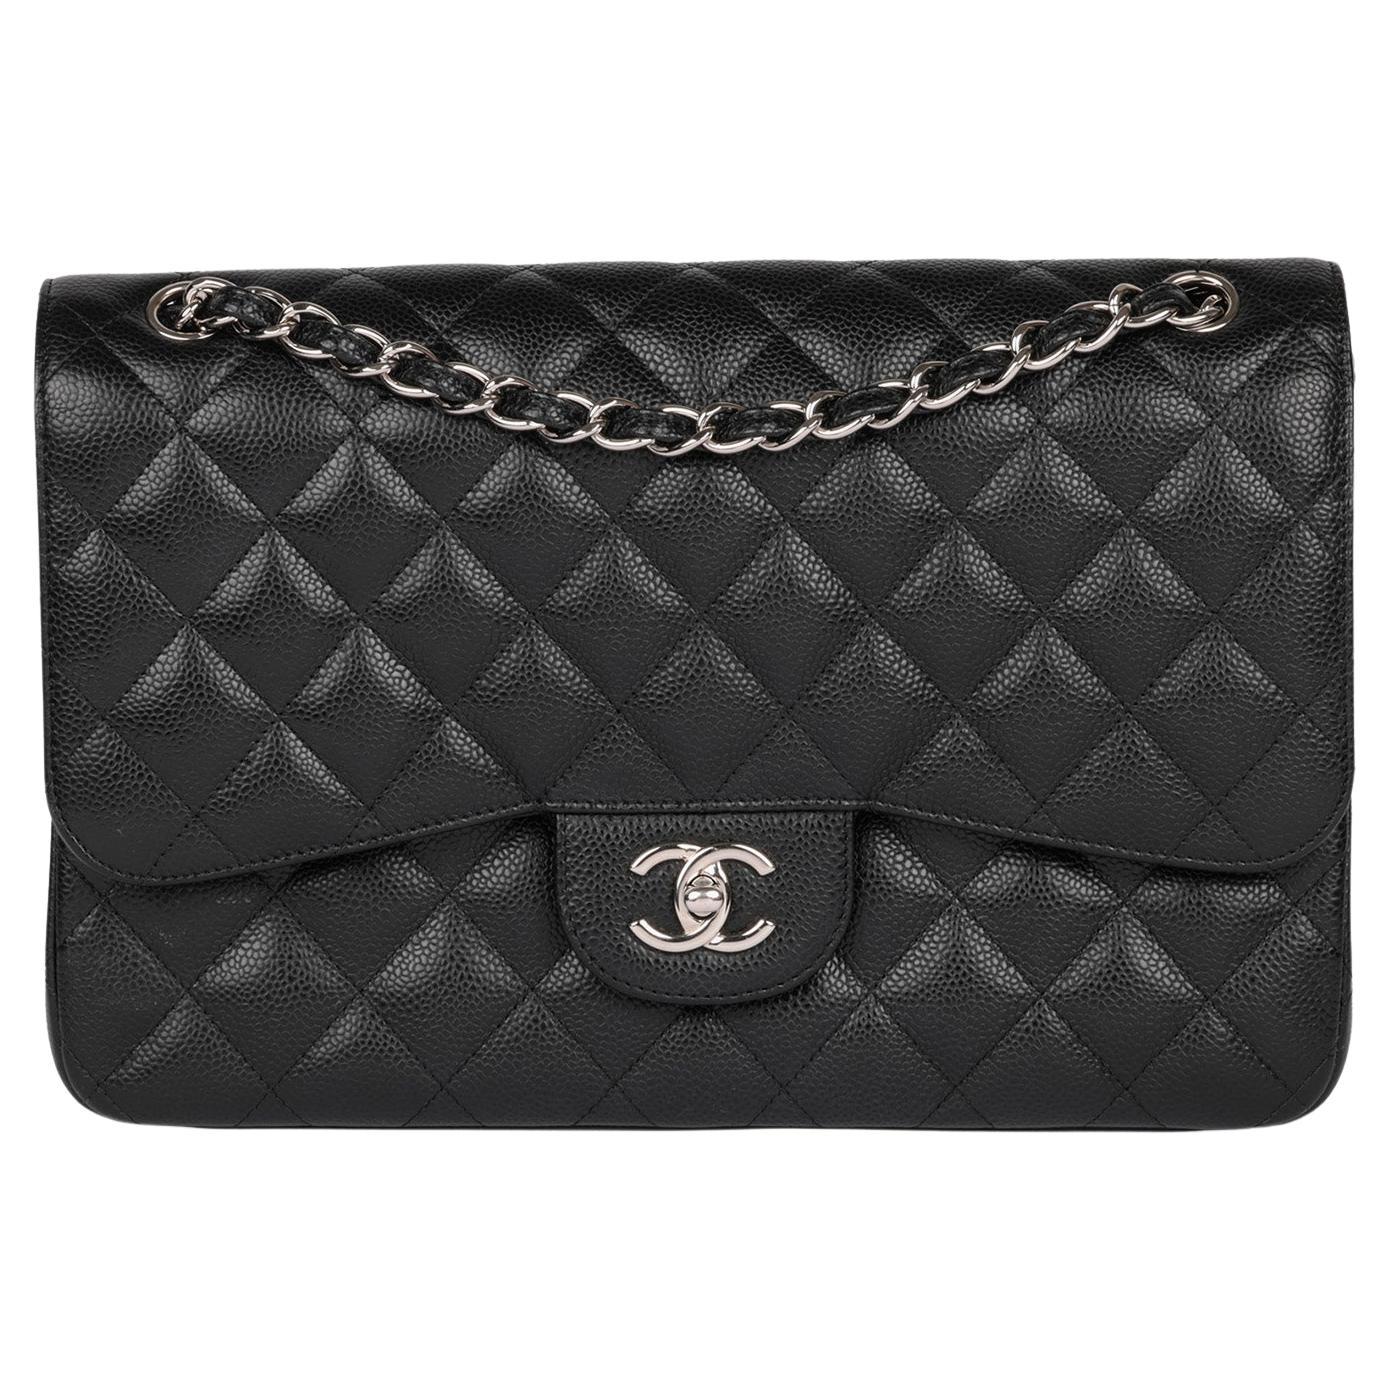 Chanel Black Caviar Leather Jumbo Classic Double Flap Bag For Sale